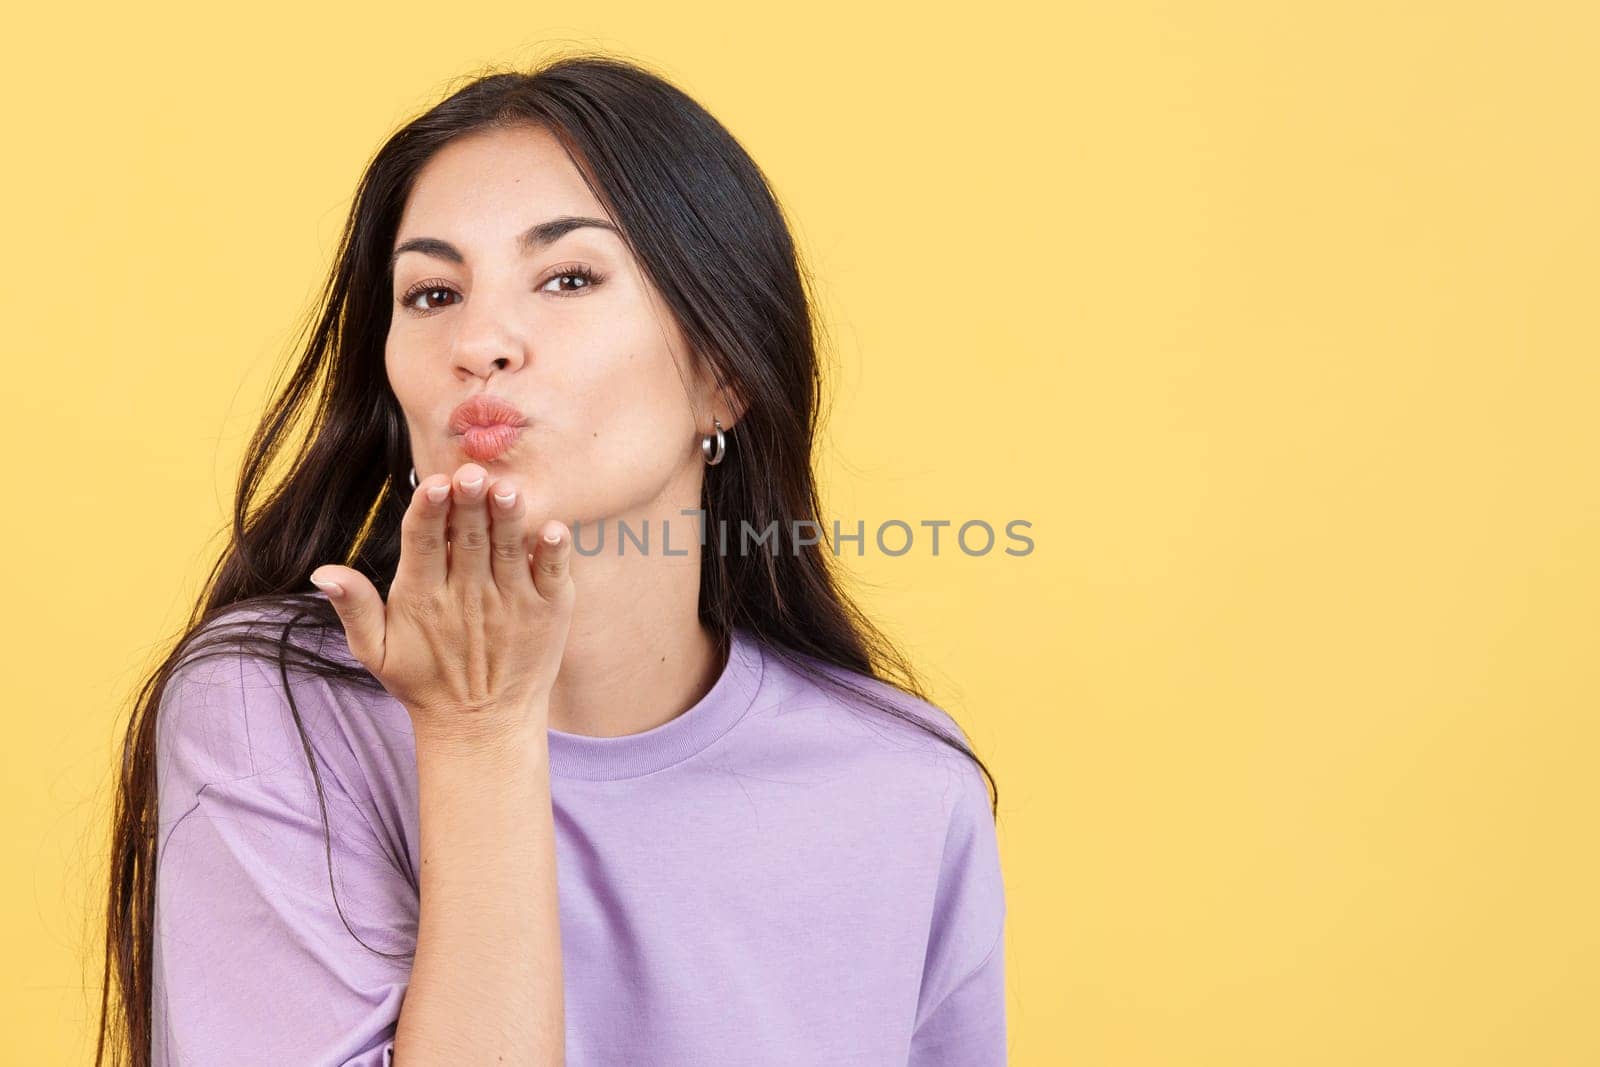 Woman blowing a kiss while looking at the camera in studio with yellow background